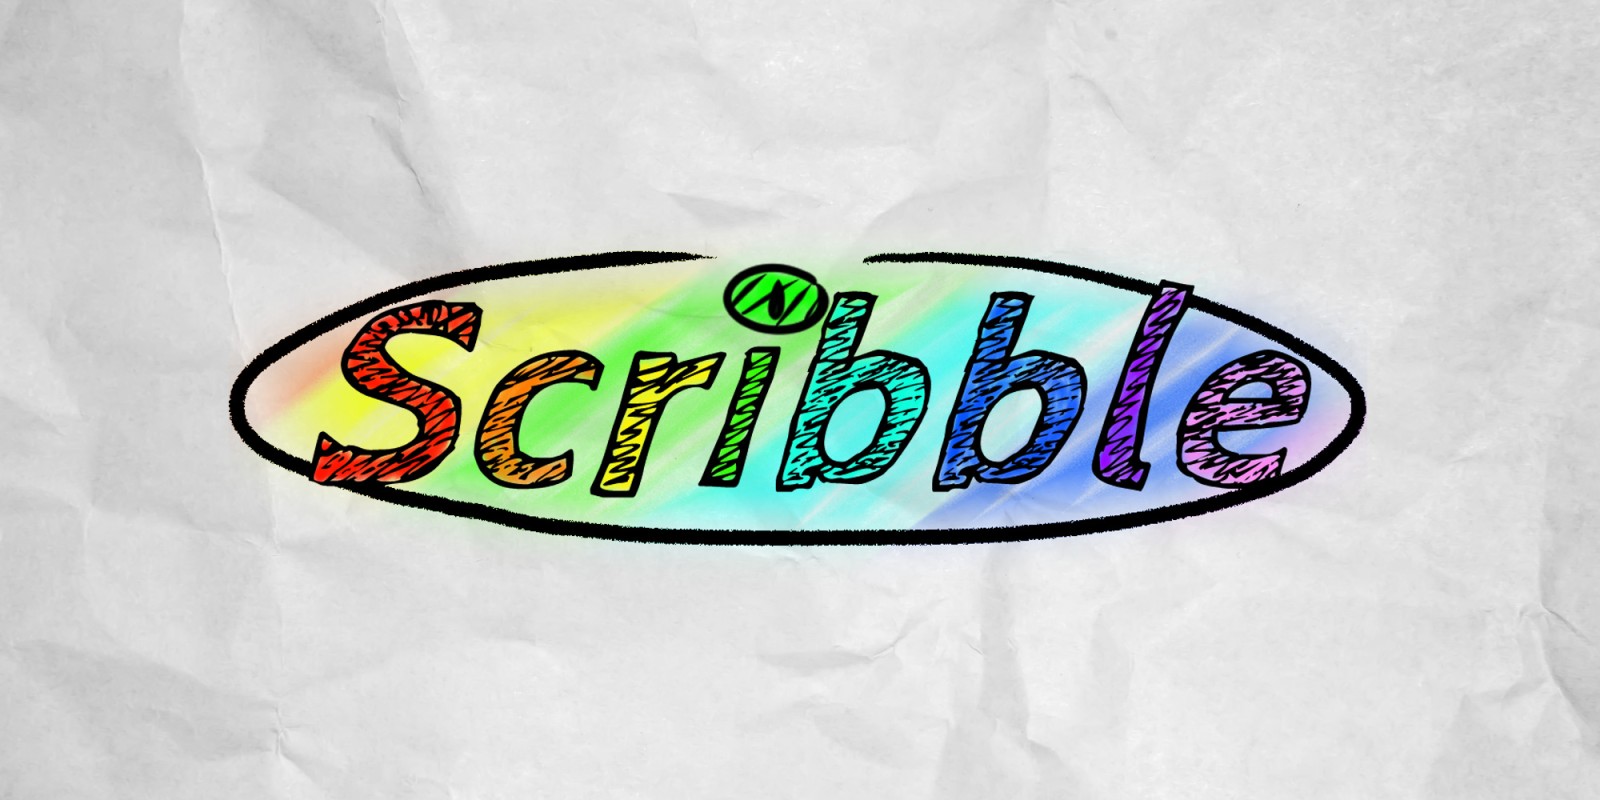 Scribble It! download the last version for mac